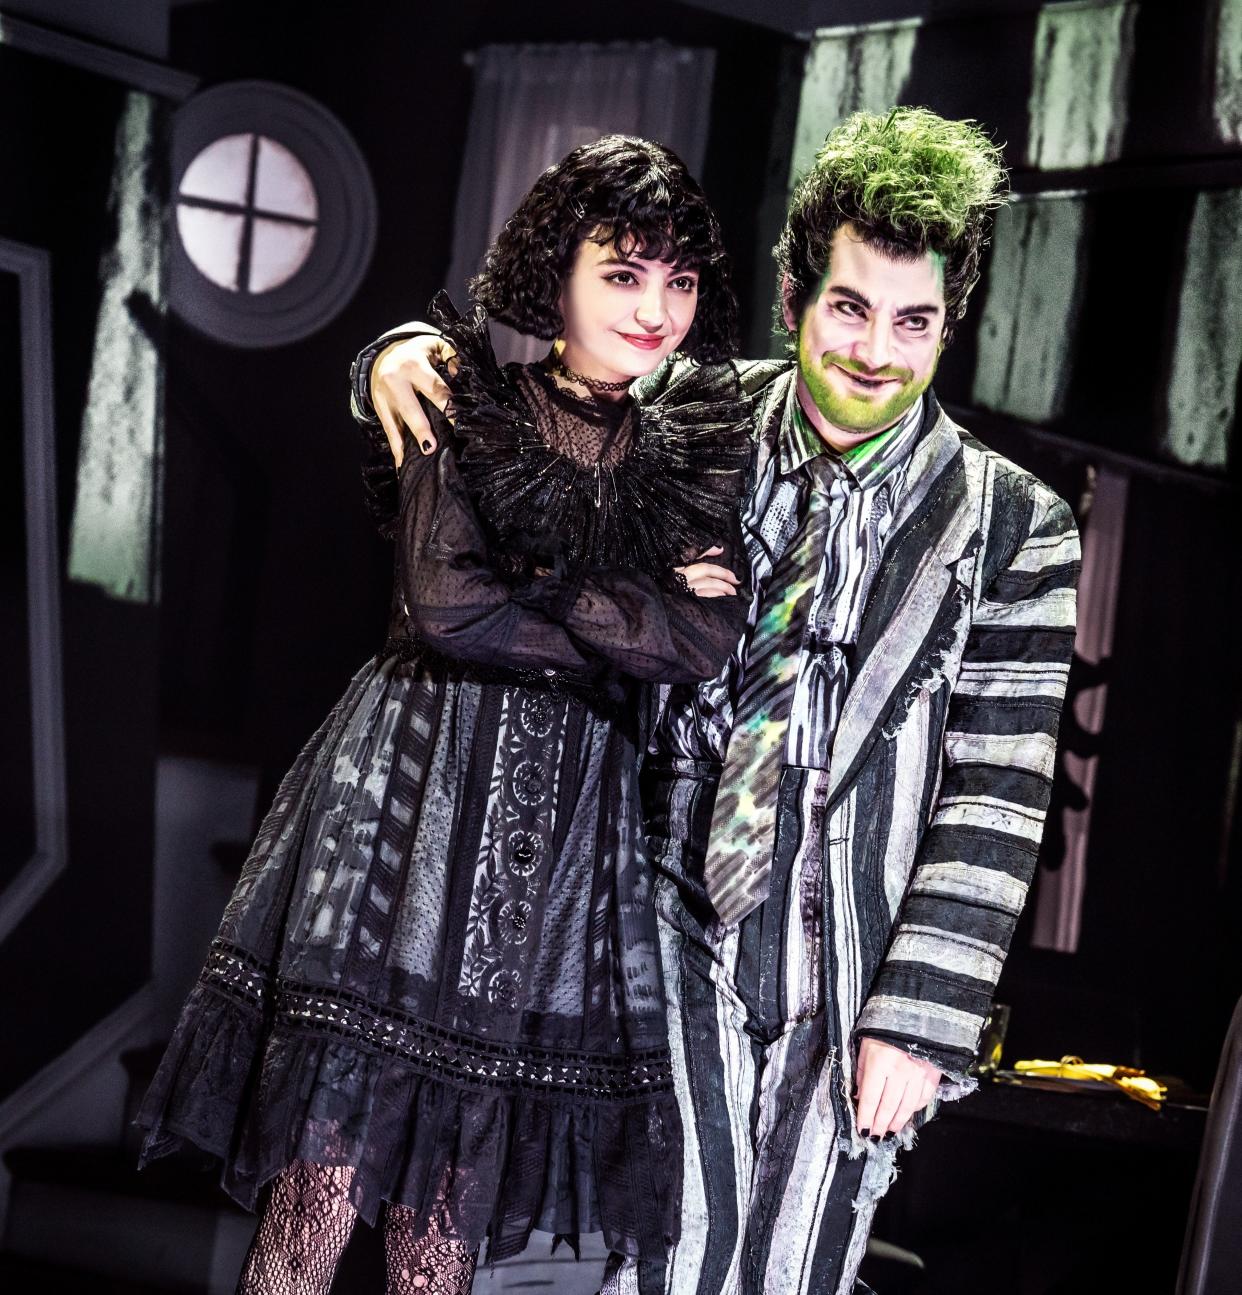 Isabella Esler and Justin Collette in "Beetlejuice," which runs through Sunday at the Kravis Center for the Performing Arts in West Palm Beach.